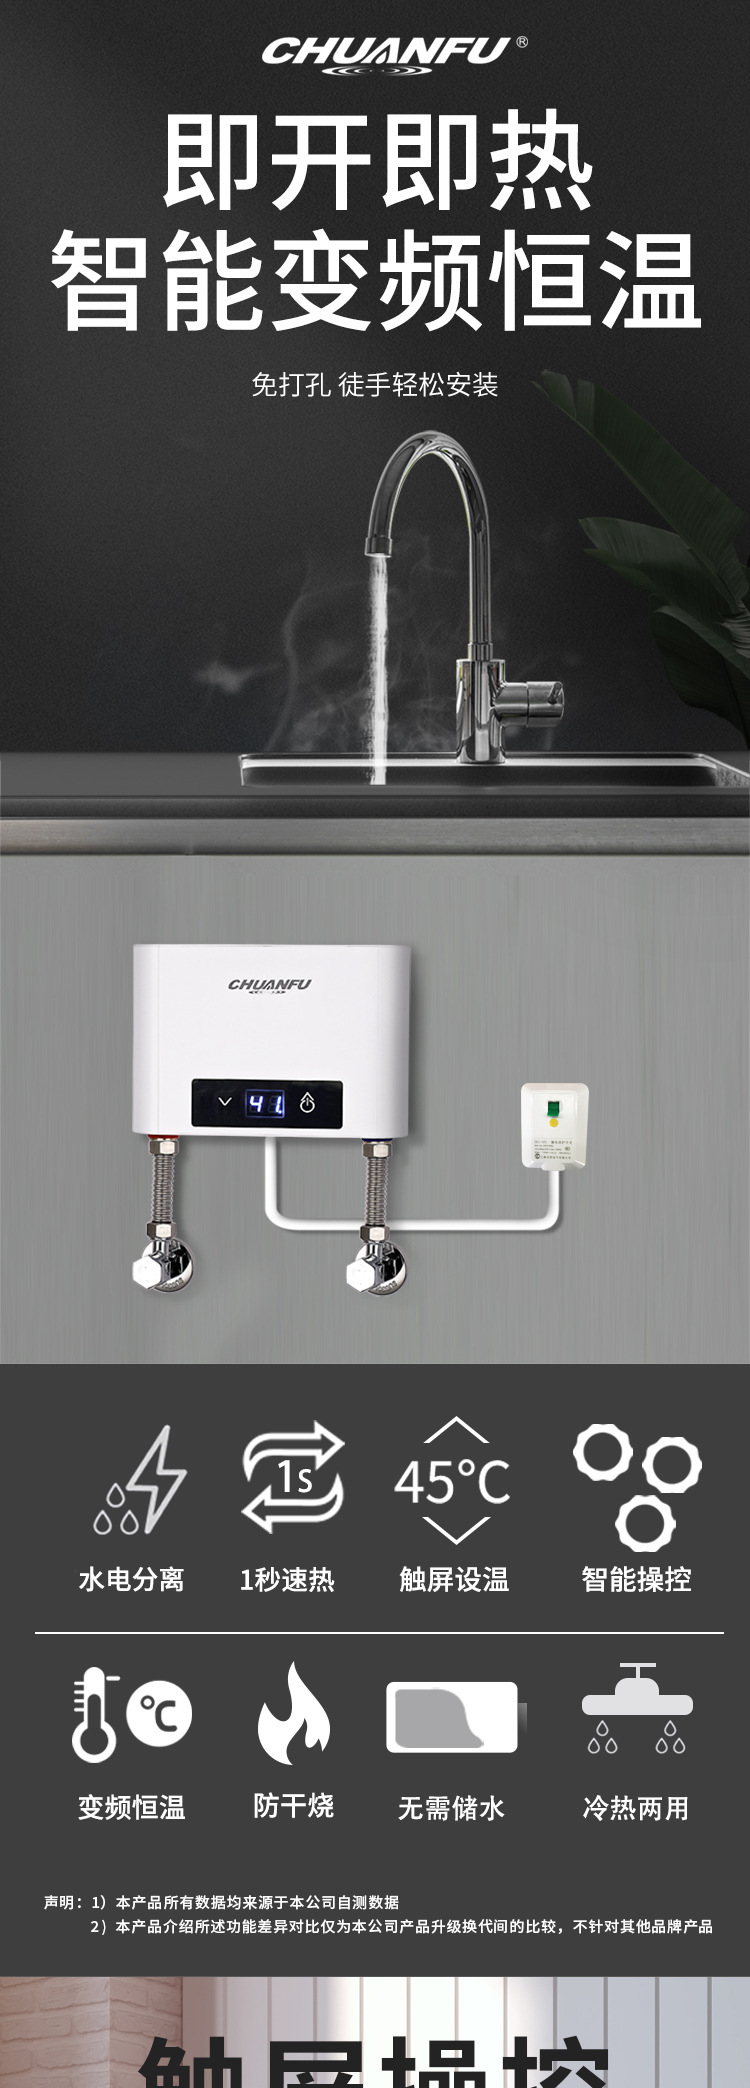 Instant Kitchen And Bath Dual-purpose Kitchen Treasure Instant Electric Water Heater Mini Instant Intelligent Constant Temperature New Product Recommendation